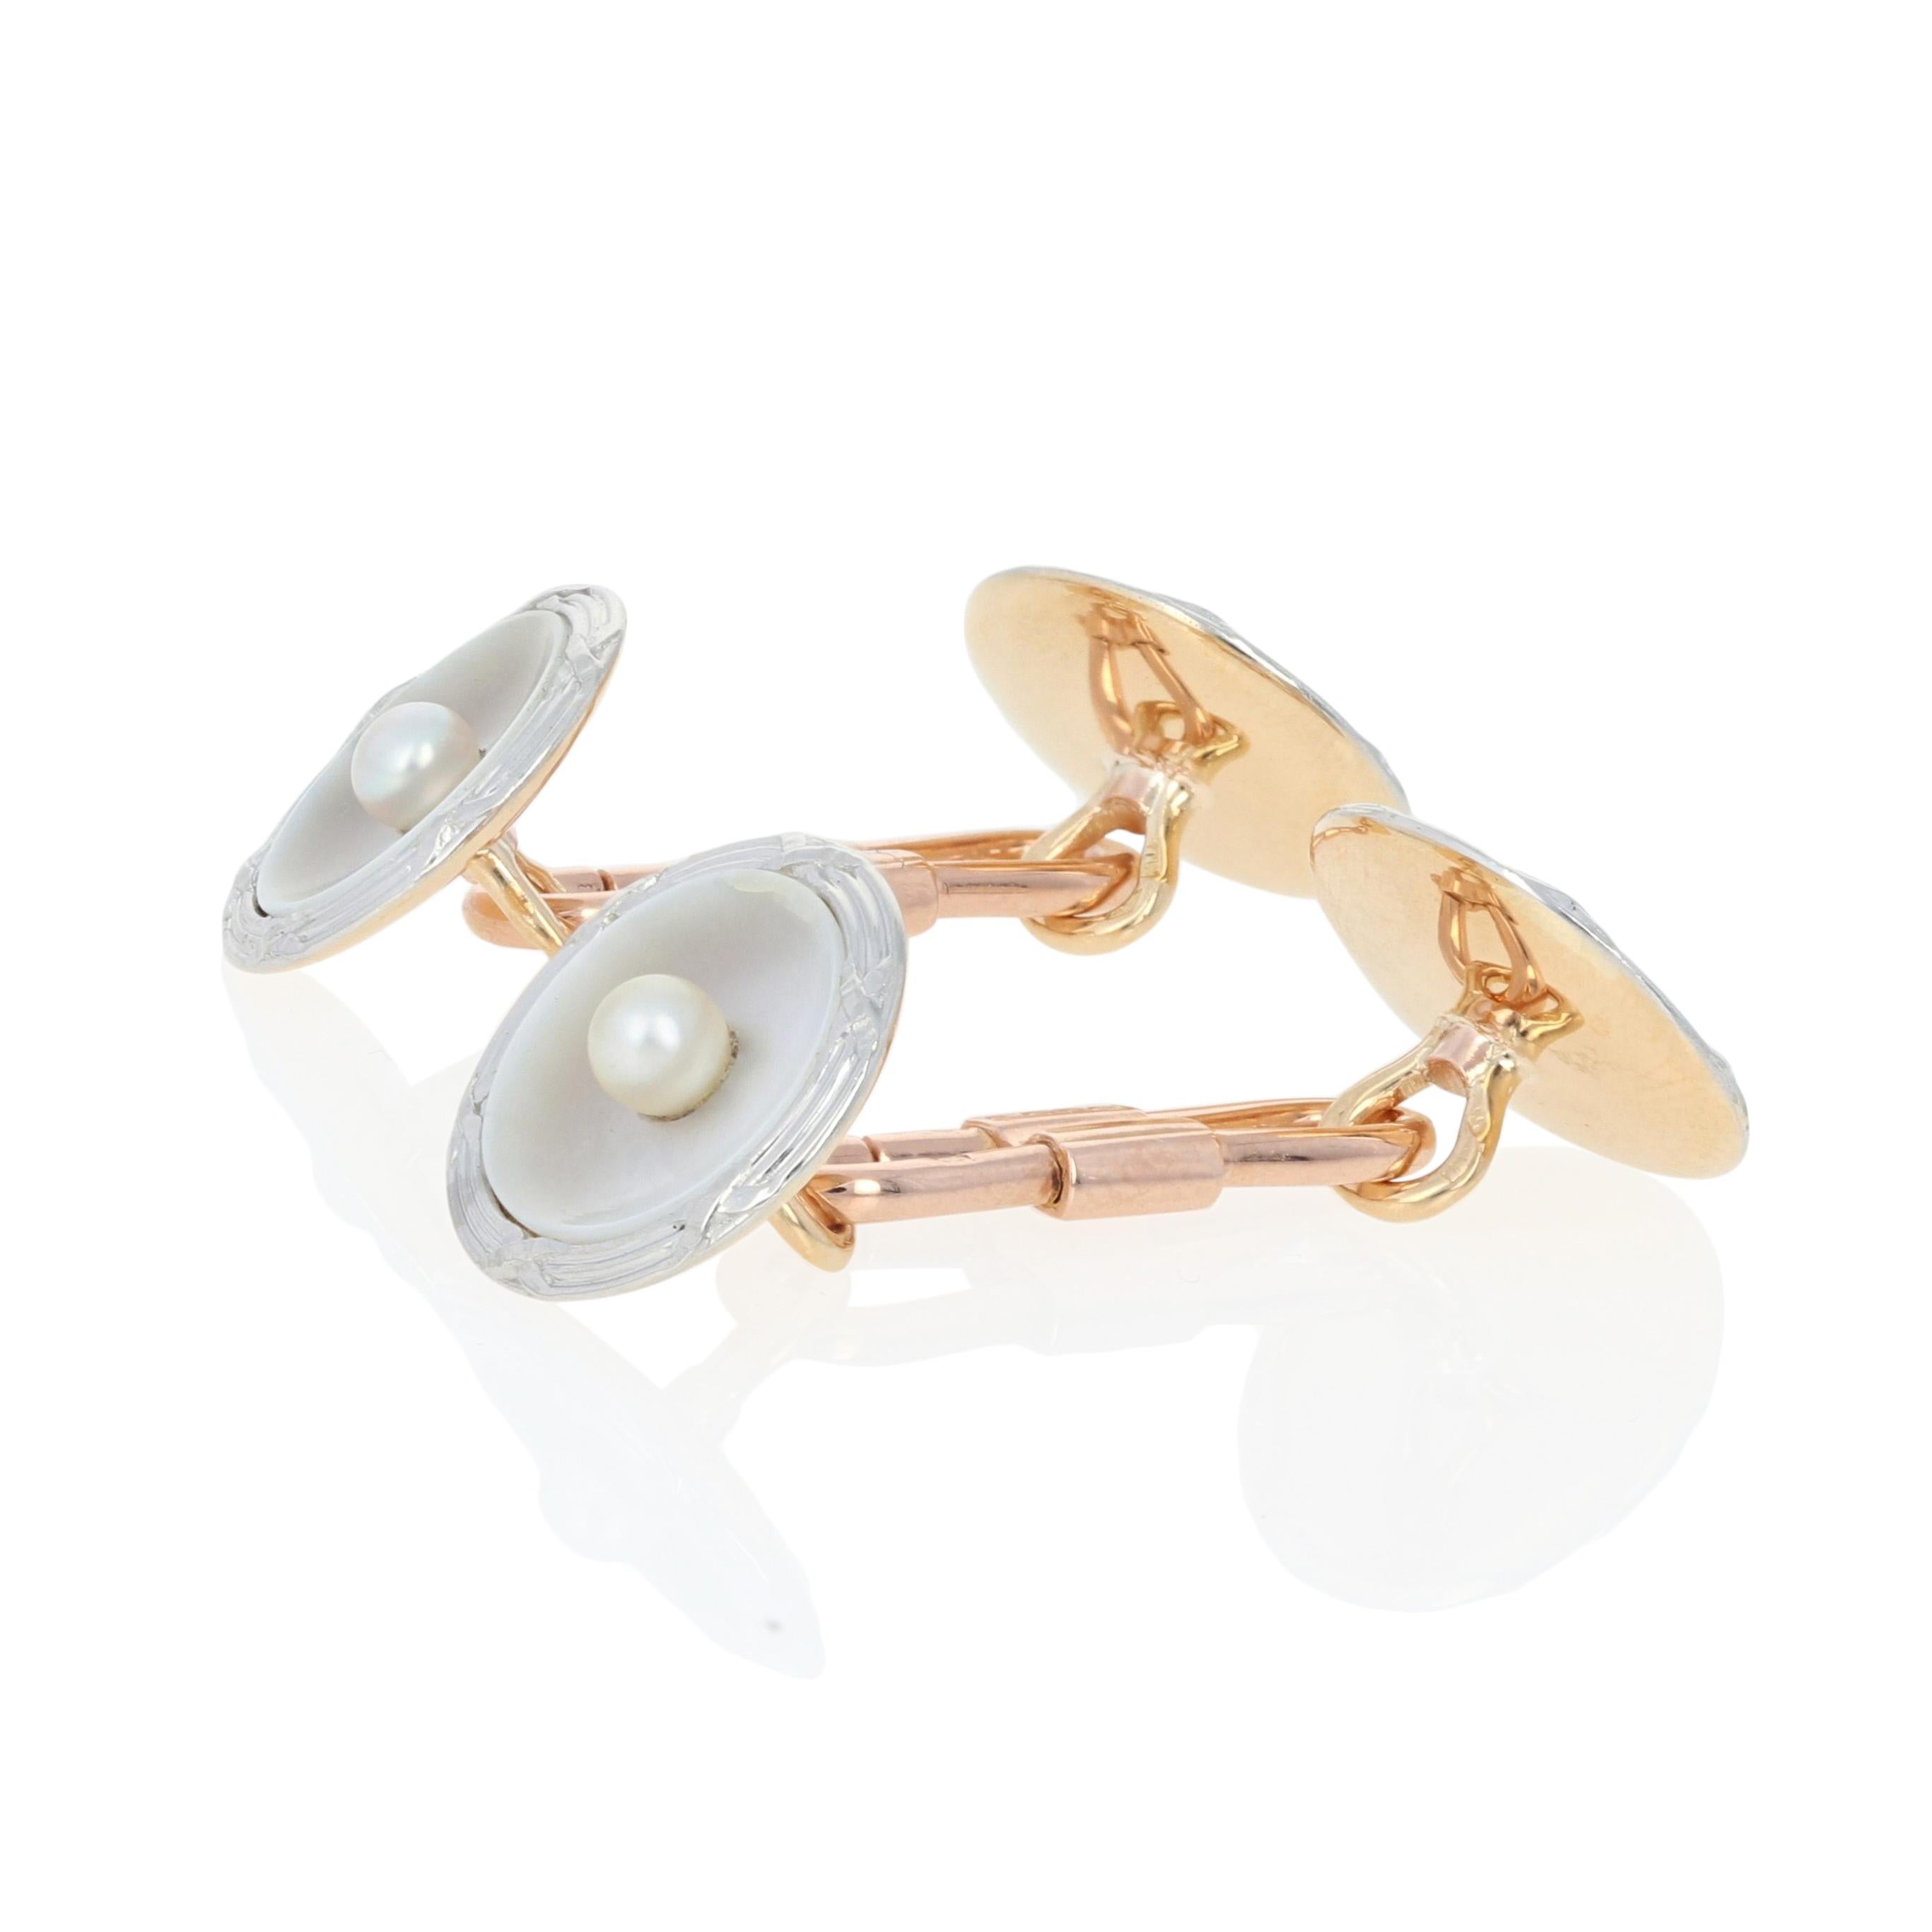 Era: Art Deco 1920s - 1930s

Metal Content: Guaranteed Platinum & 18k Gold as tested

Stone Information: 
Genuine Mother of Pearl
Cultured Pearls
 
Each Cufflink's Face: 9/16